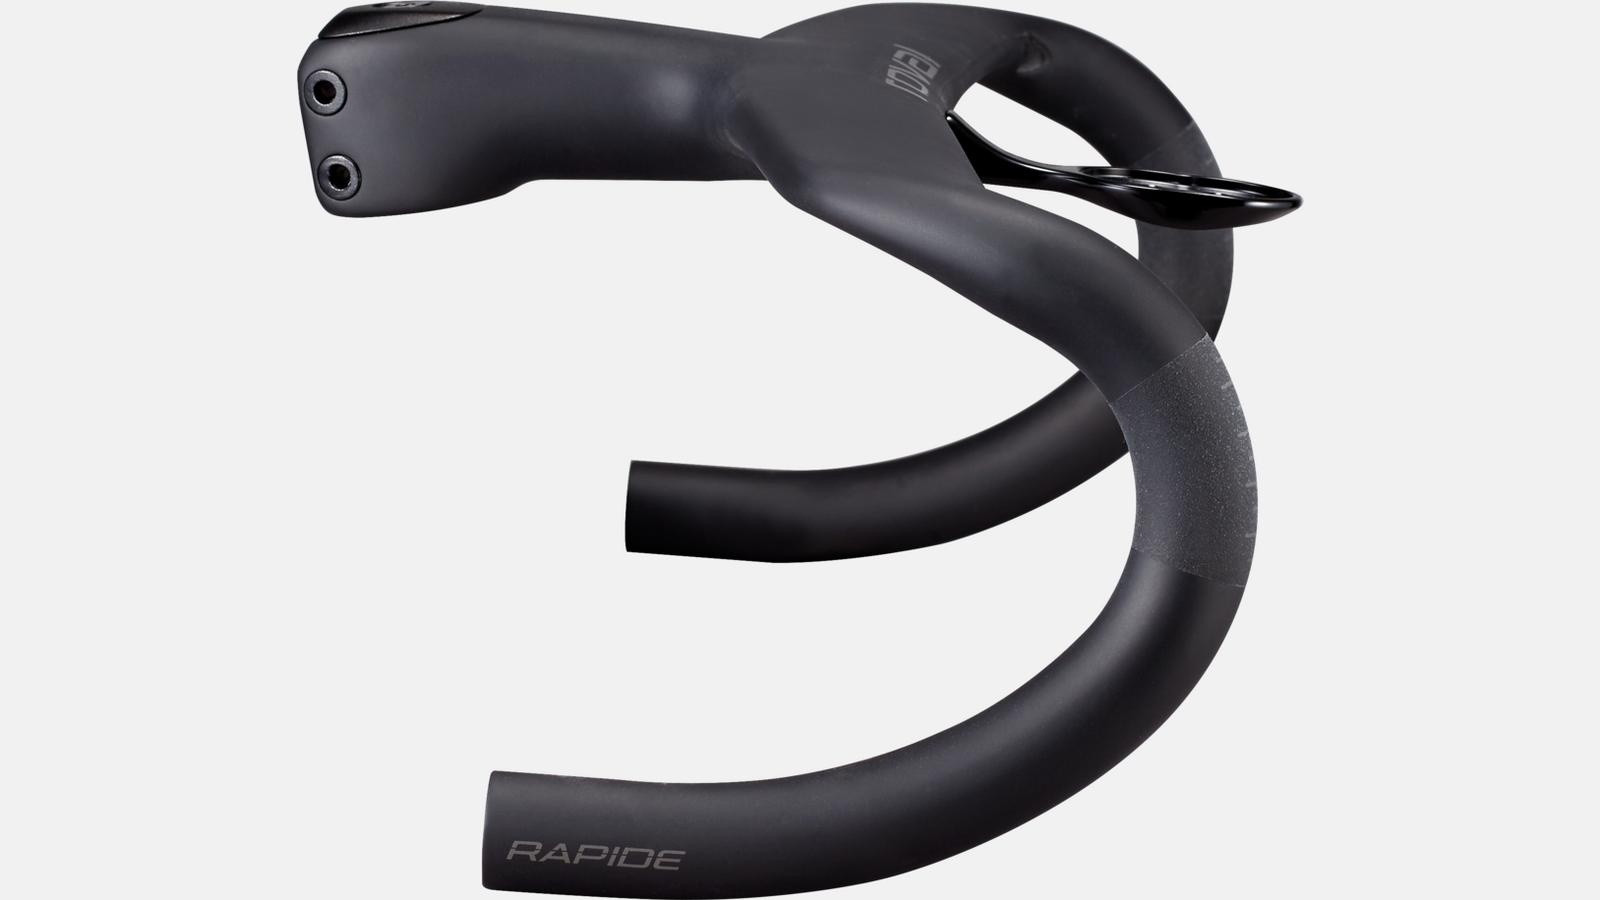 Specialized Roval Rapide Cockpit 135mm x 420mm - THE BICYCLE STATION